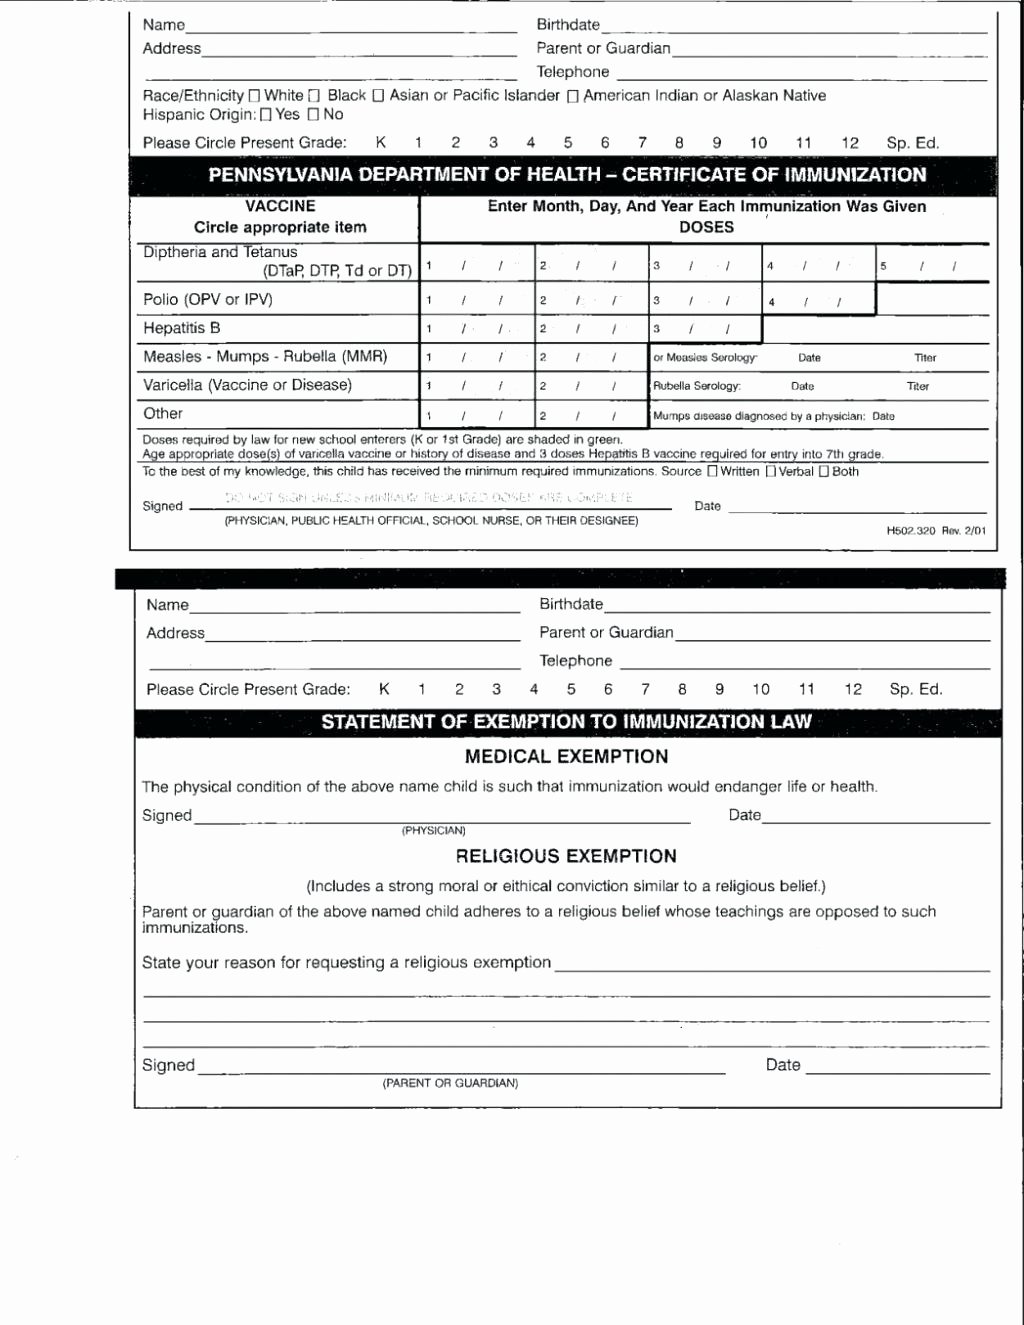 Medical Records forms Template Beautiful Shot Record Templ On Free Personal Health Record